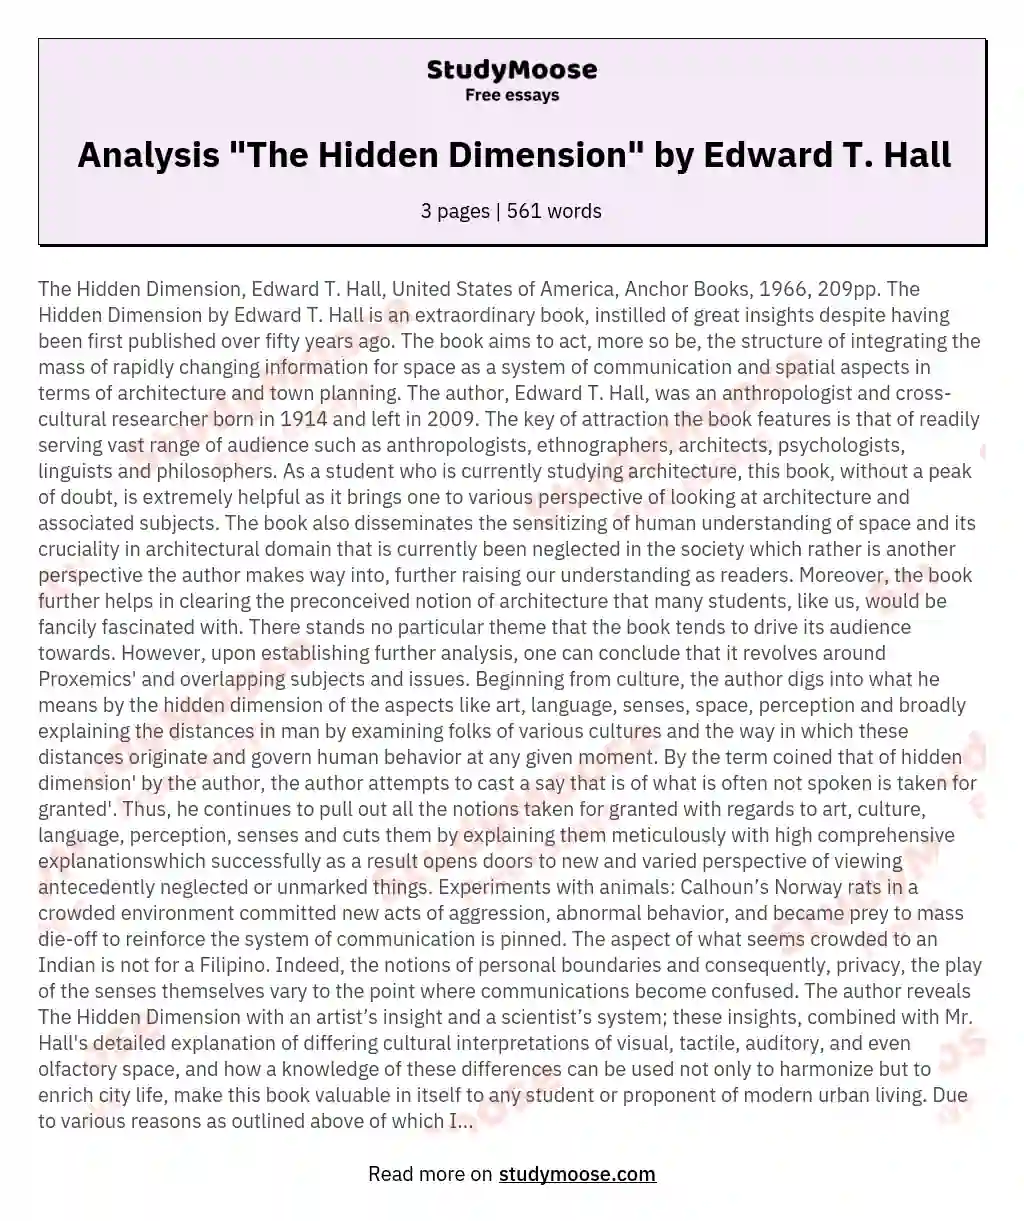 Analysis "The Hidden Dimension" by Edward T. Hall